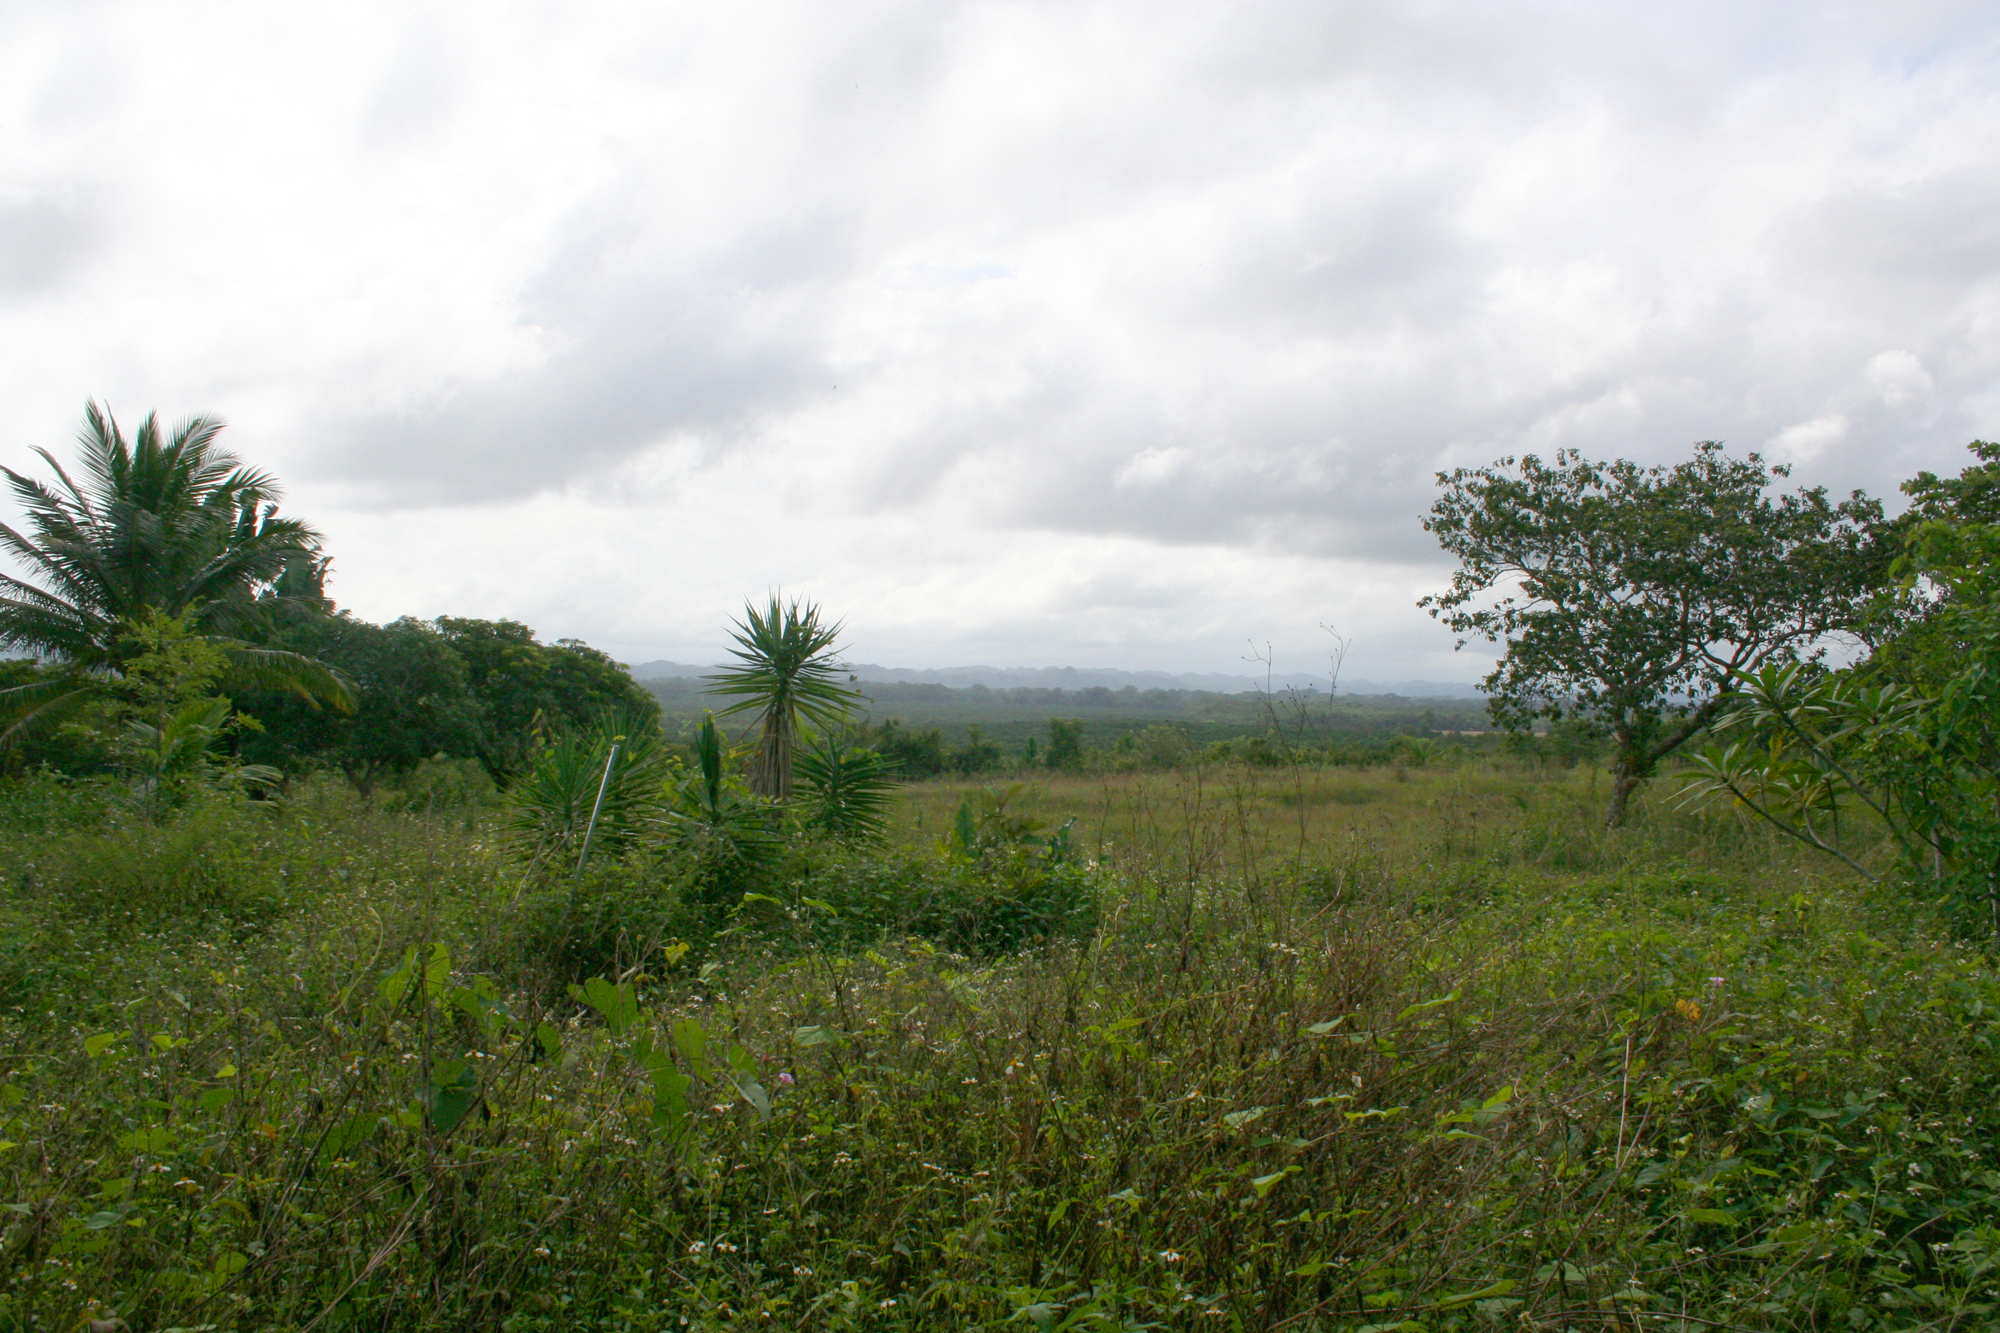 lush vegetation with trees in the background under cloudy skies